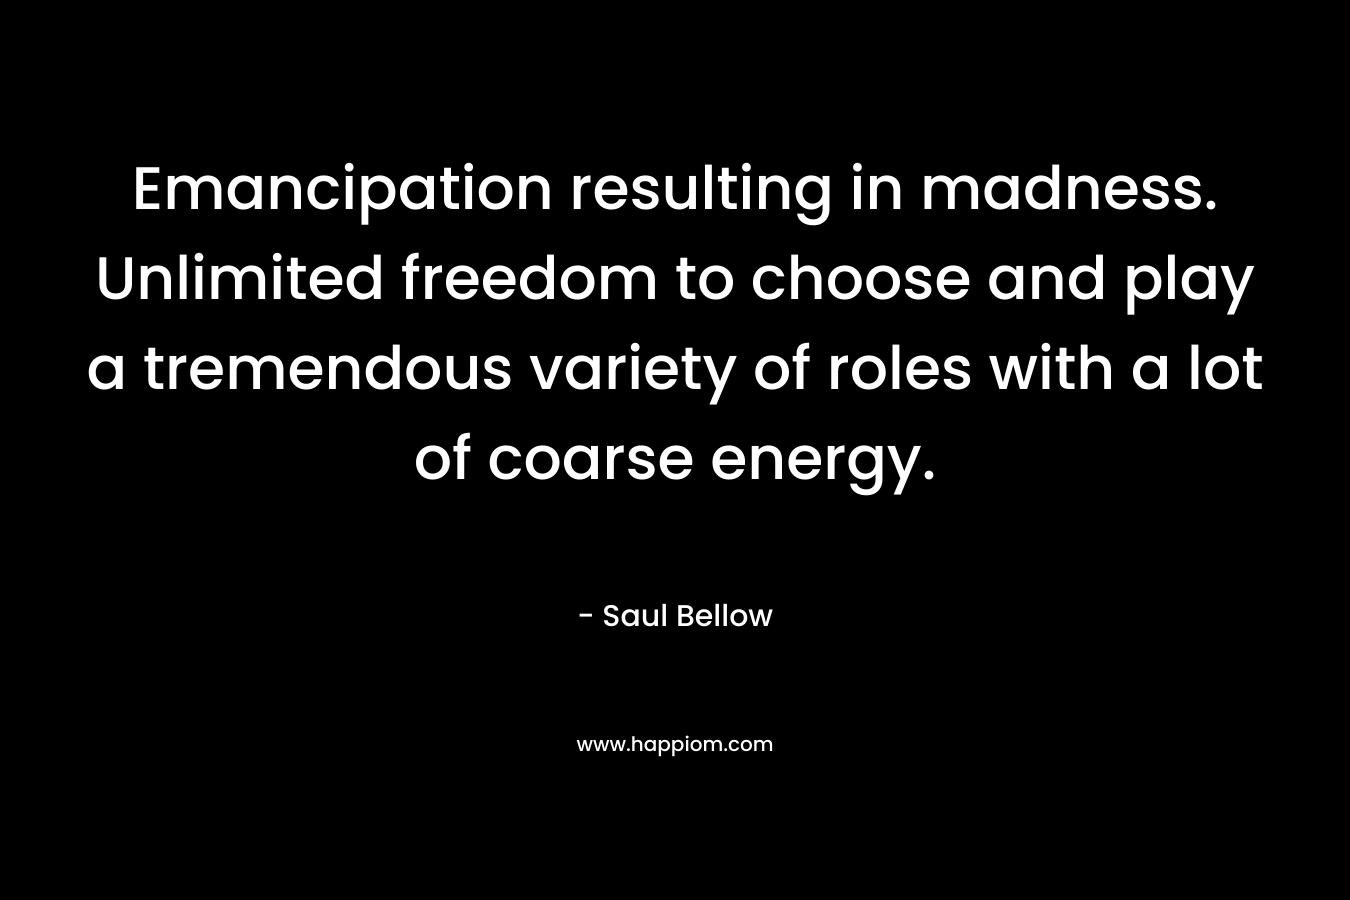 Emancipation resulting in madness. Unlimited freedom to choose and play a tremendous variety of roles with a lot of coarse energy. – Saul Bellow